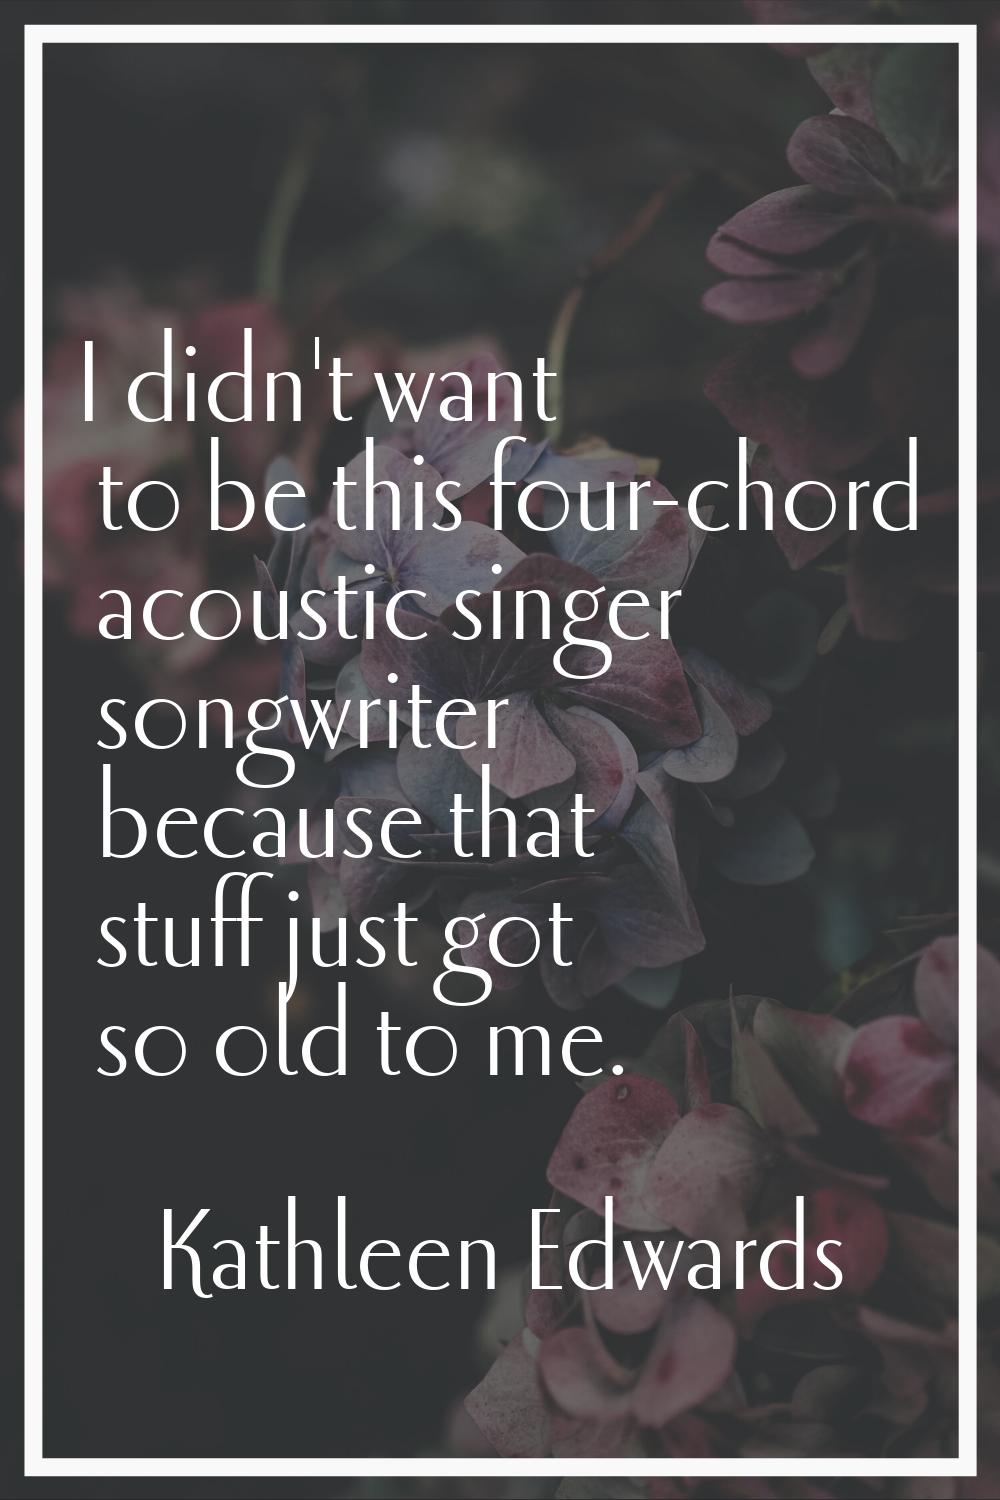 I didn't want to be this four-chord acoustic singer songwriter because that stuff just got so old t